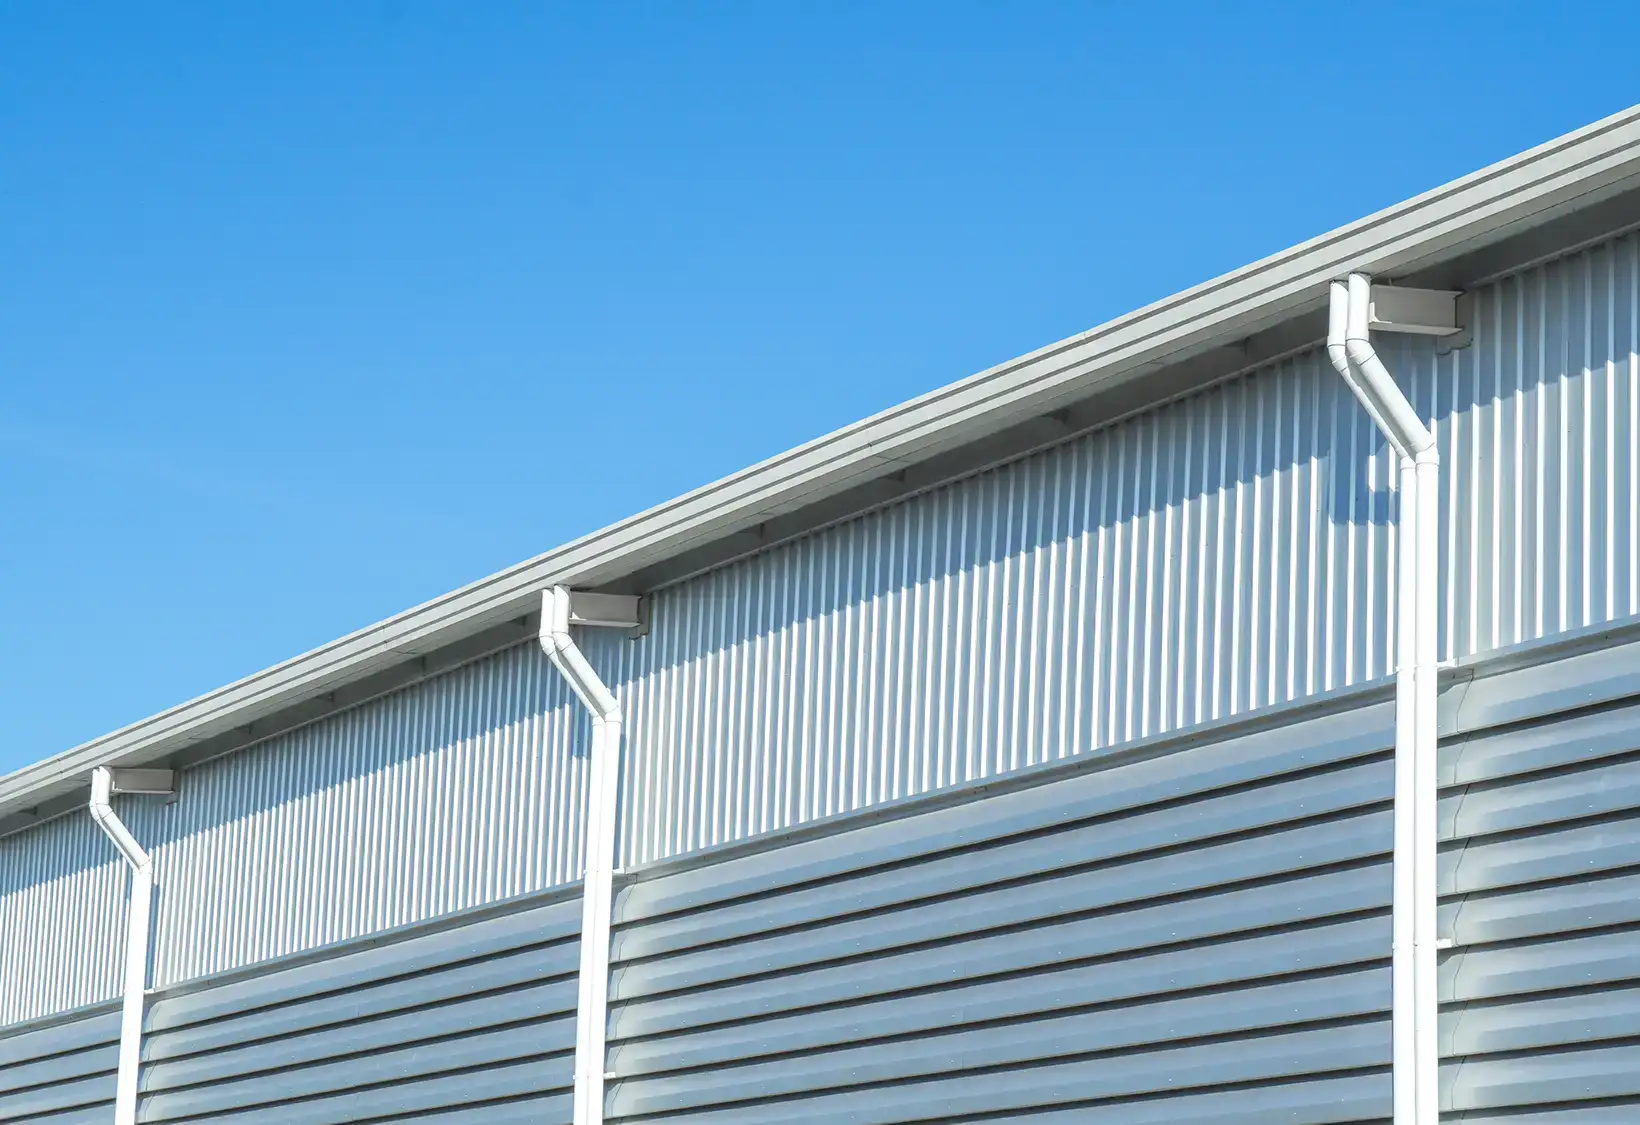 Commercial gutter system for large warehouse - O'Fallon, IL